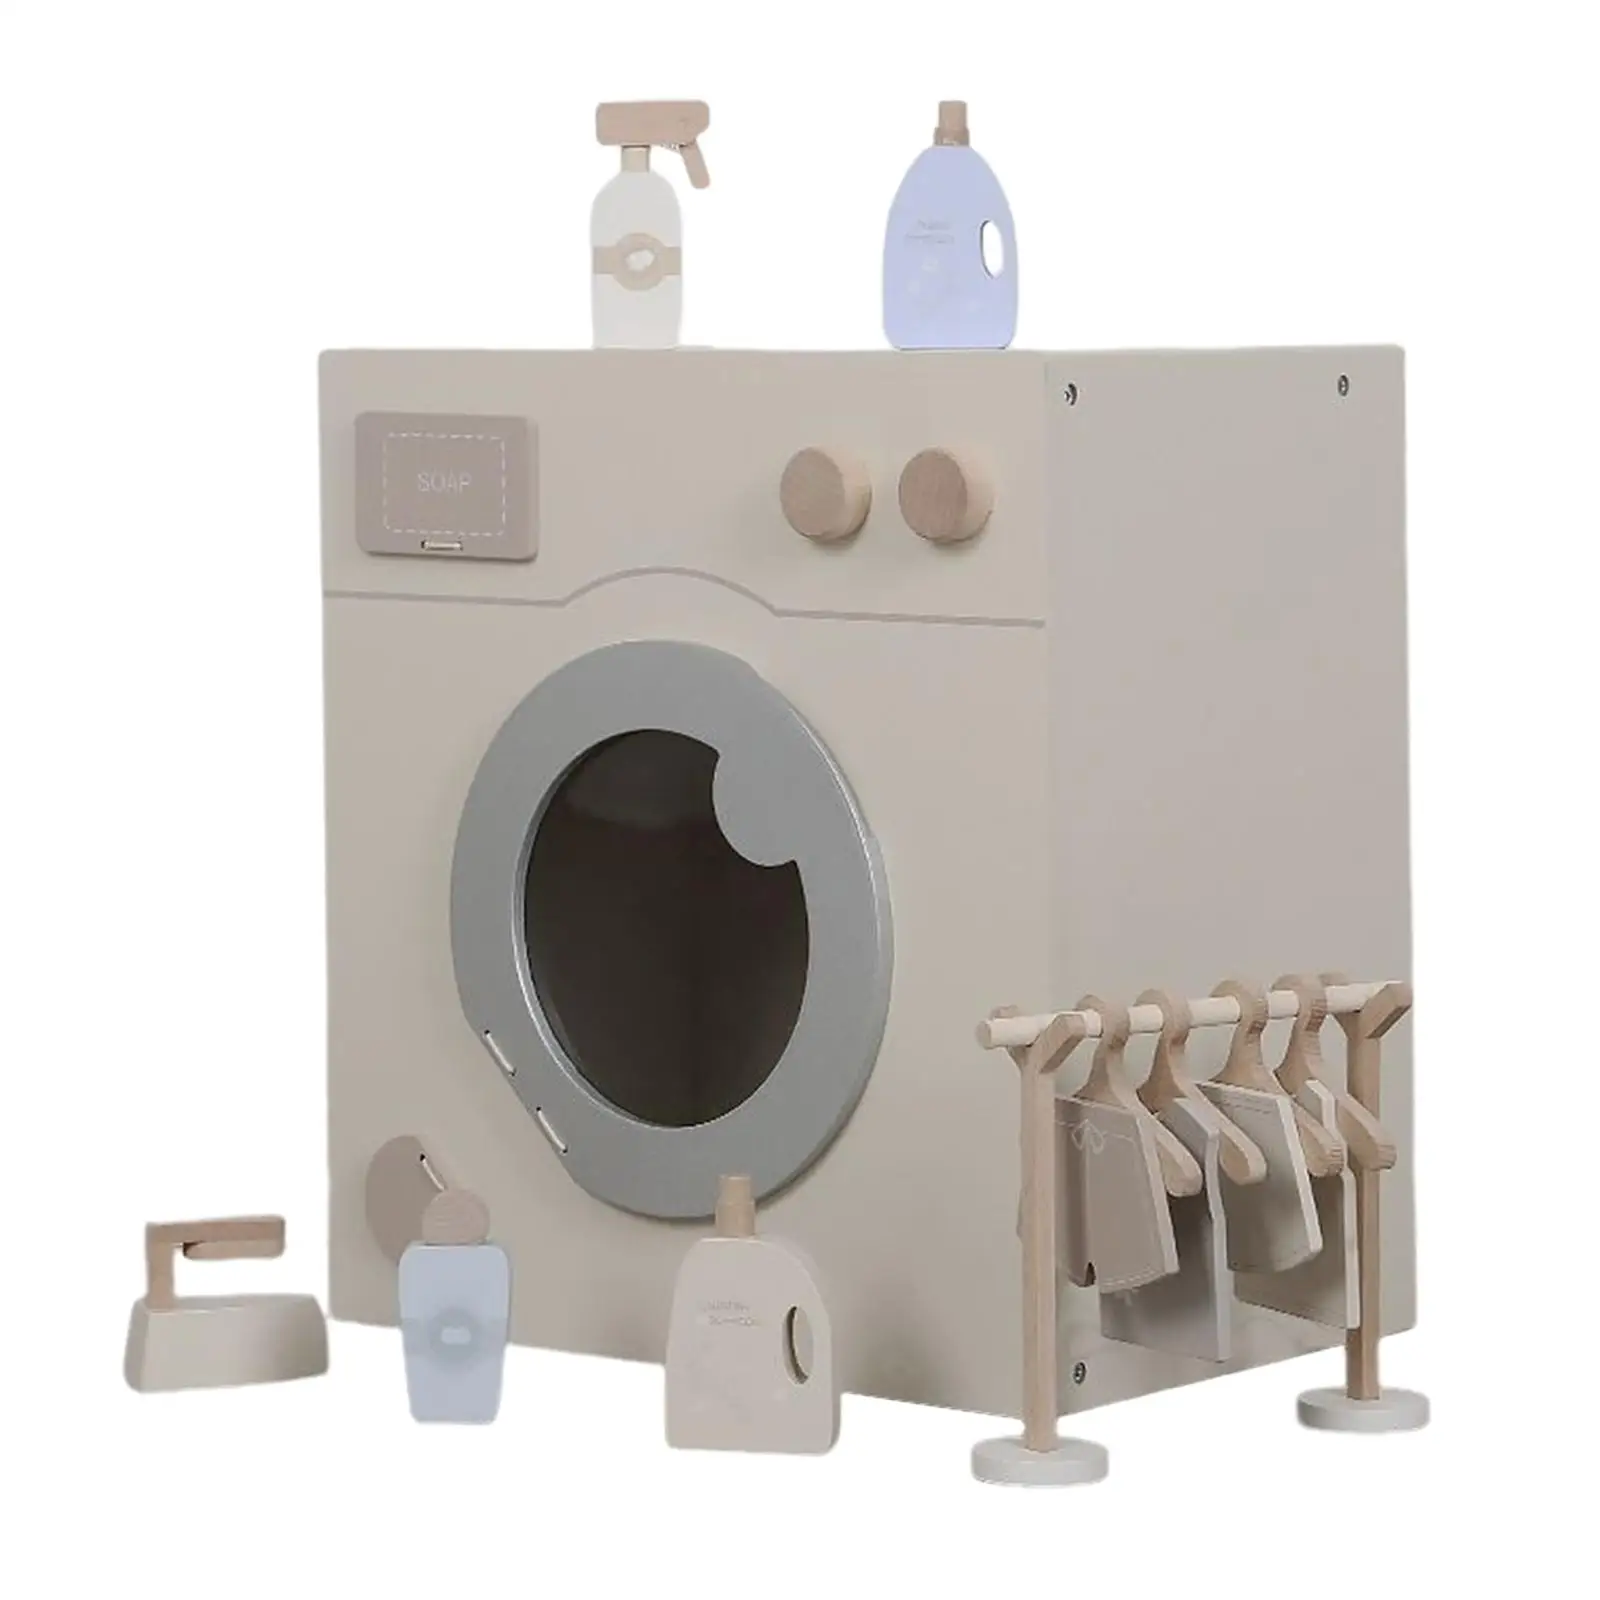 Washing Machine Playset with Accessories Pretend Play for Toddlers Kids Gift